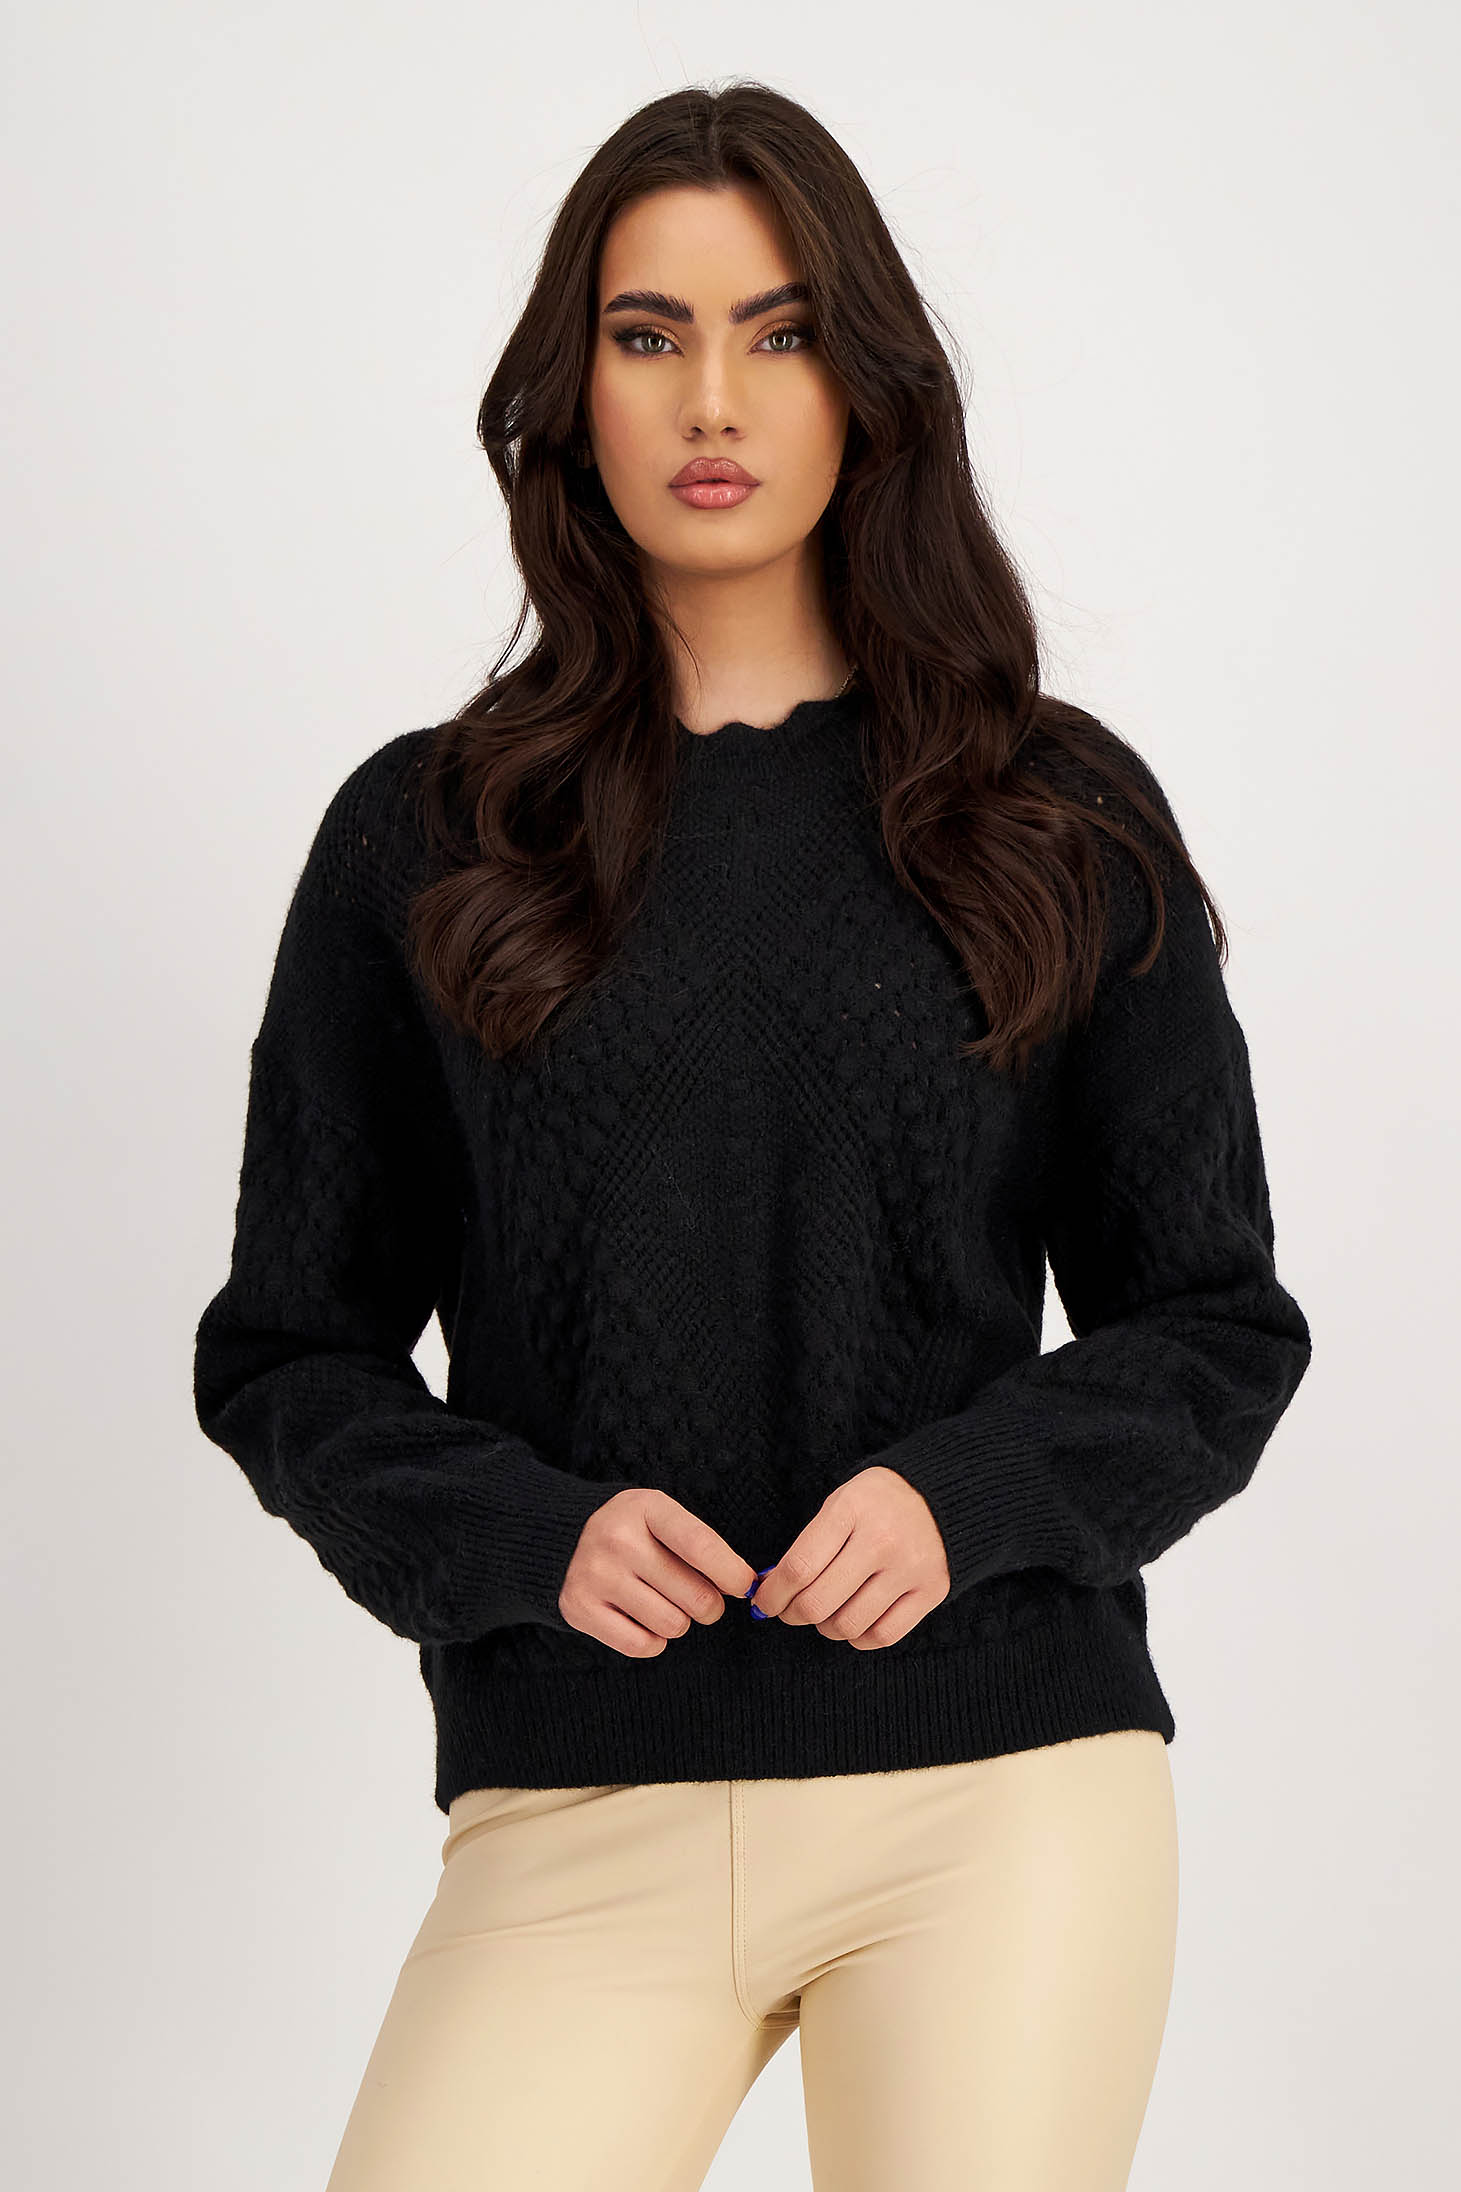 Black knitted sweater with a loose fit and rounded neckline with embossed pattern - SunShine